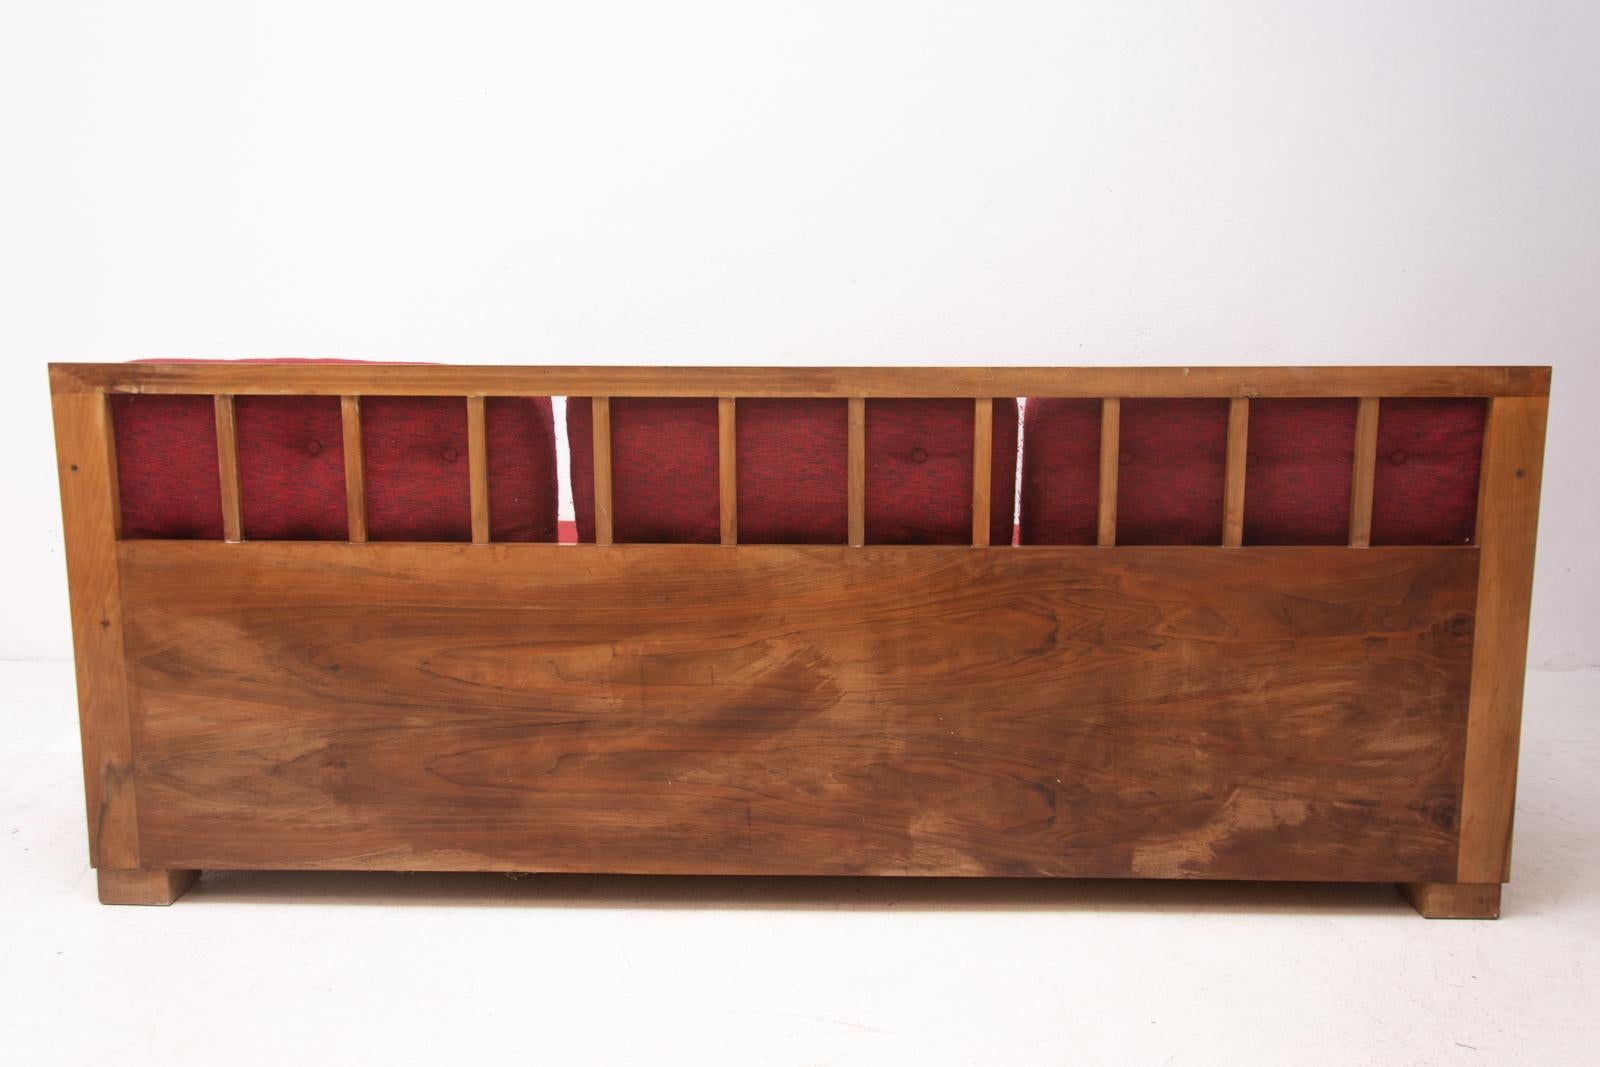 This functionalist sofa, model number H-215 was designed by the famous architect Jindrich Halabala in the 1930s for UP Zavody. The piece is a beautiful example of Czechoslovak prewar functionalism.
The sofa has an oak construction with side panels